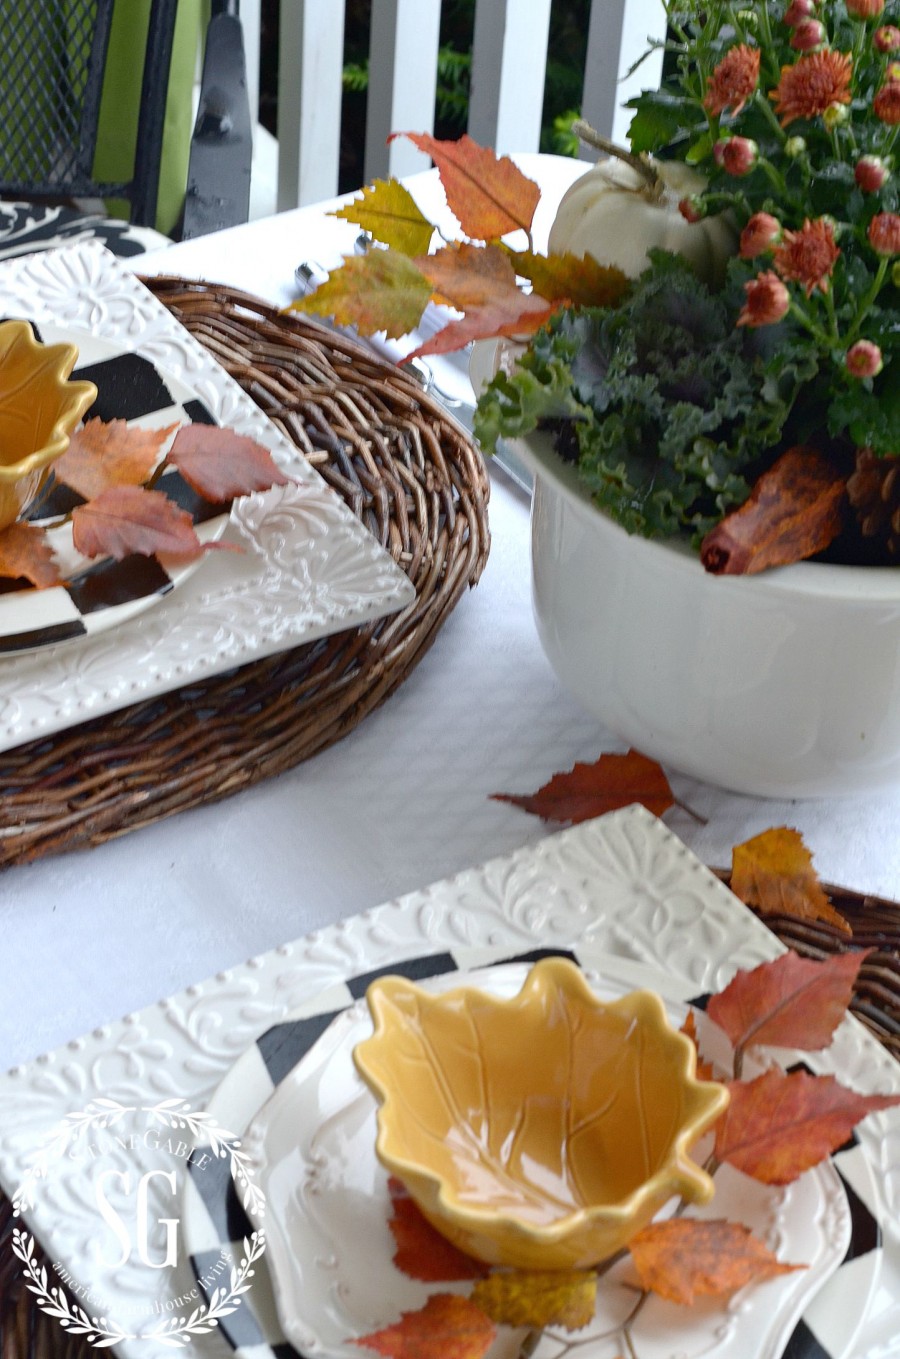 FALL TABLESCAPE ON THE BACK PORCH-Setting an eary fall table with autumnal colors and elements-stonegableblog.com